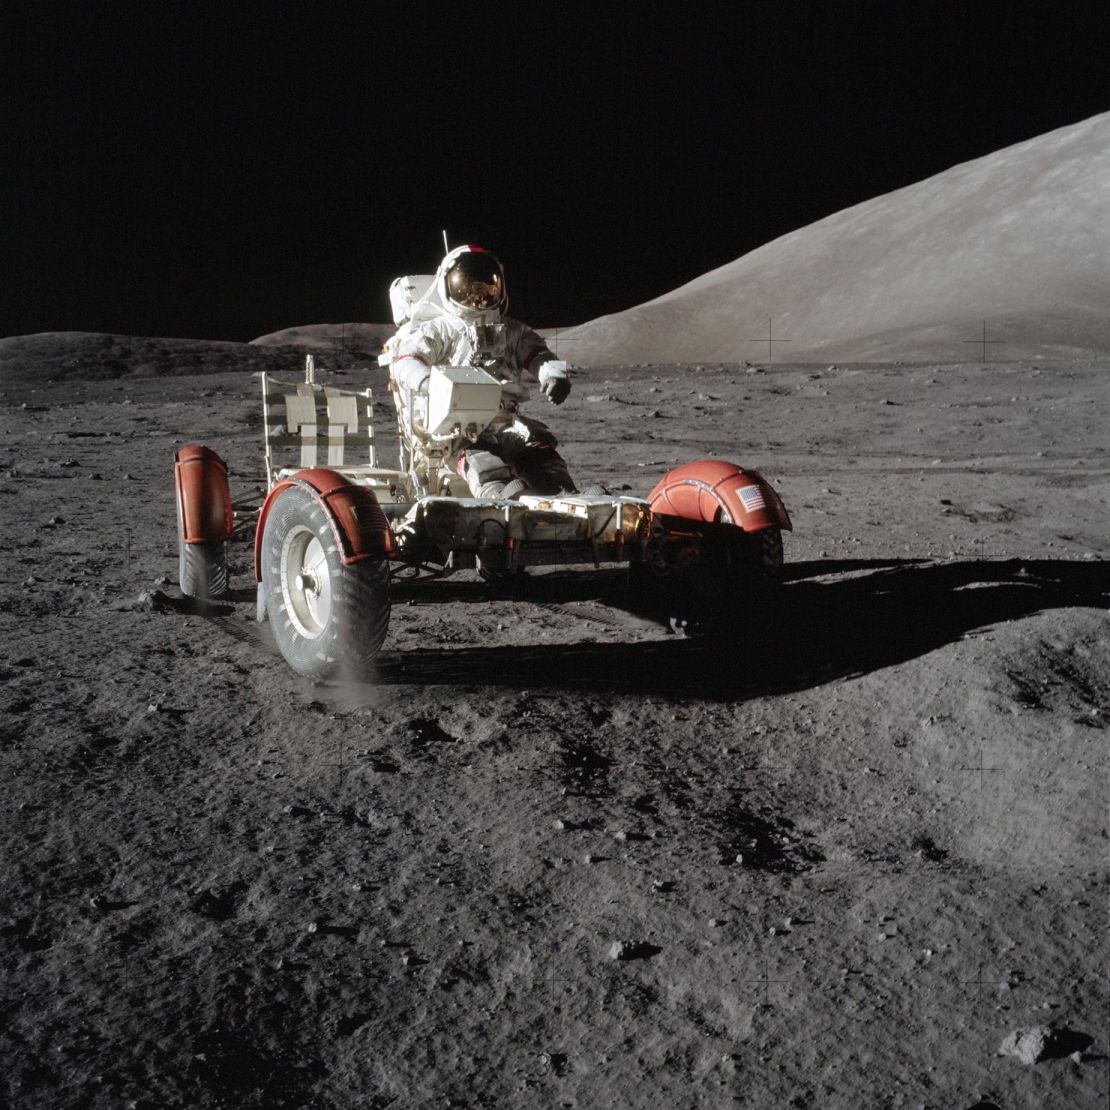 Astronaut Eugene A. Cernan drove a lunar rover across the moon during the Apollo 17 mission in 1972. It's been more than 50 years and he's still on the moon.